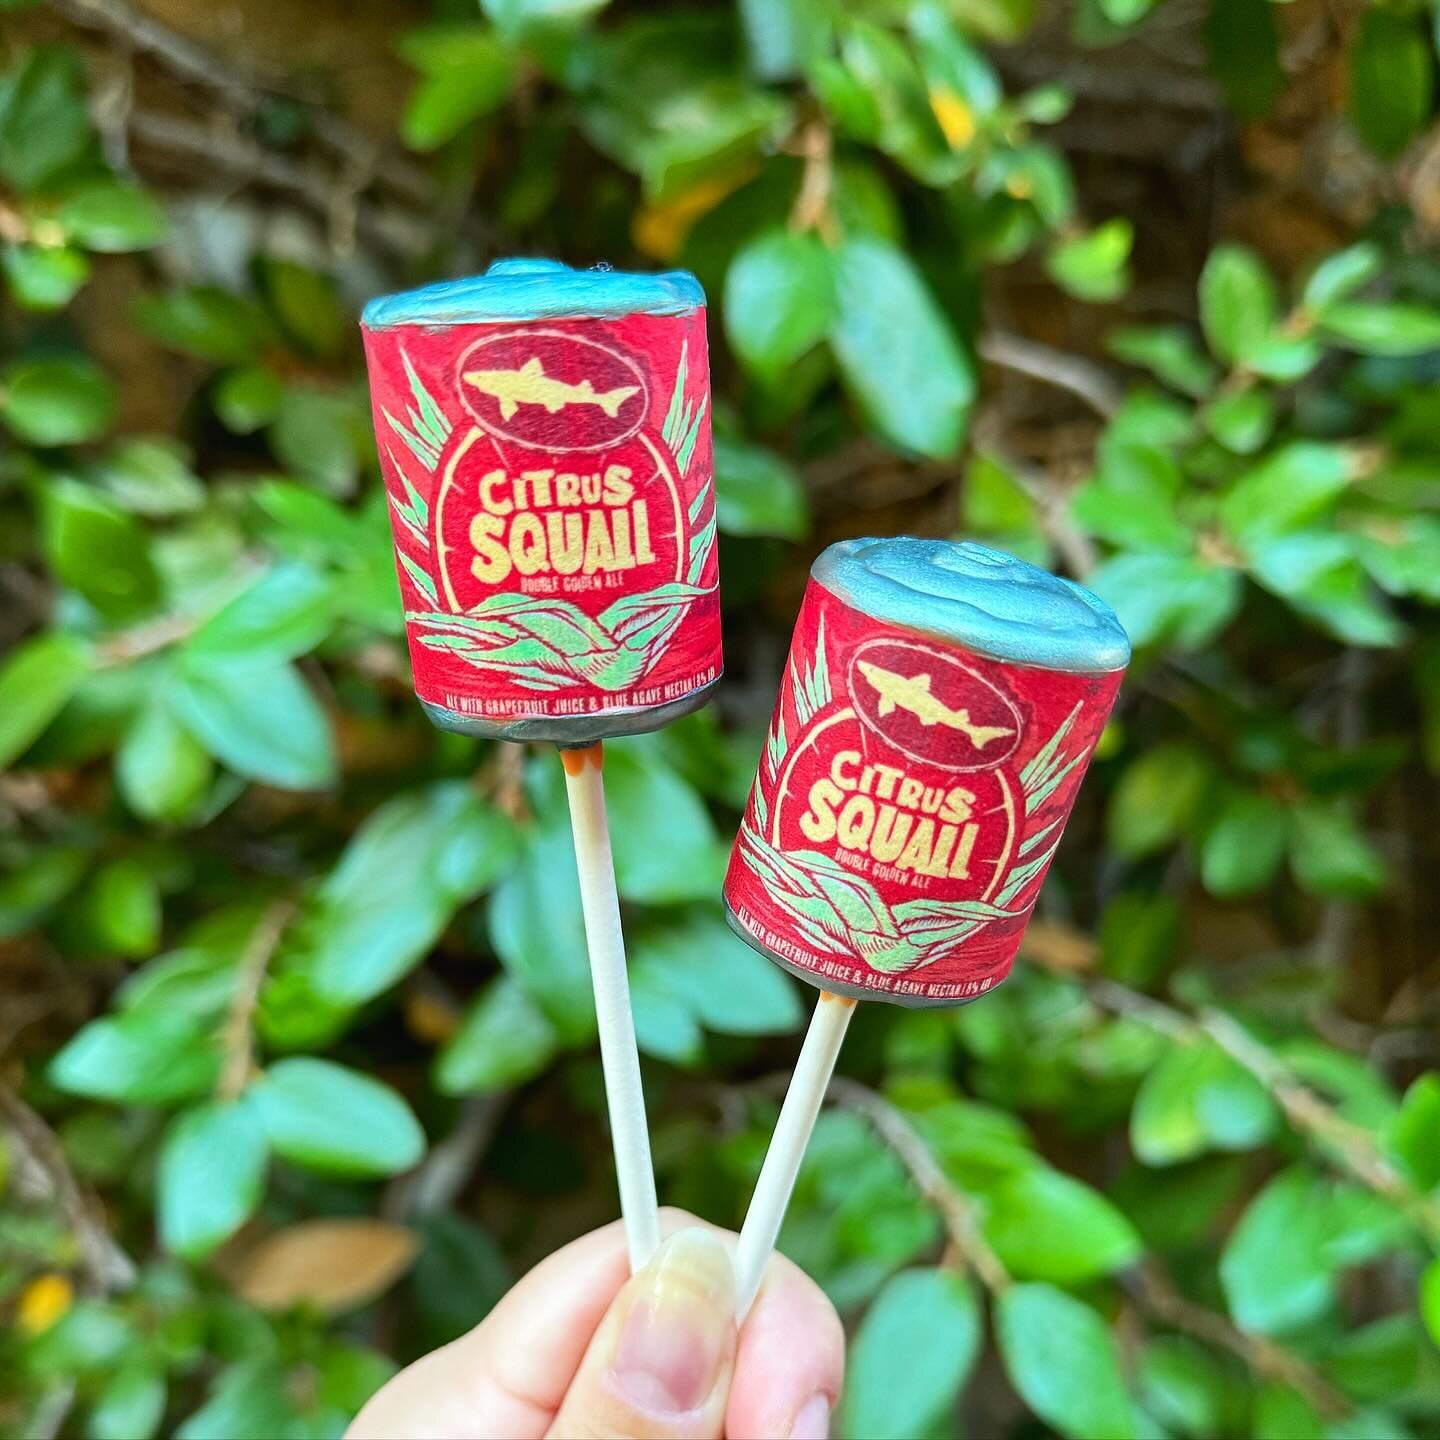 Custom #CitrusSquall beer cans for @dogfishhead! Cheers!🍻
&bull;
&bull;
&bull;
#cakepops #baking #dessert #sweets #foodie #foodporn #foodphotography #instadessert #foodofinstagram #bakersofinstagram #dessertgram #cakepopsofinstagram #cakepopstagram 